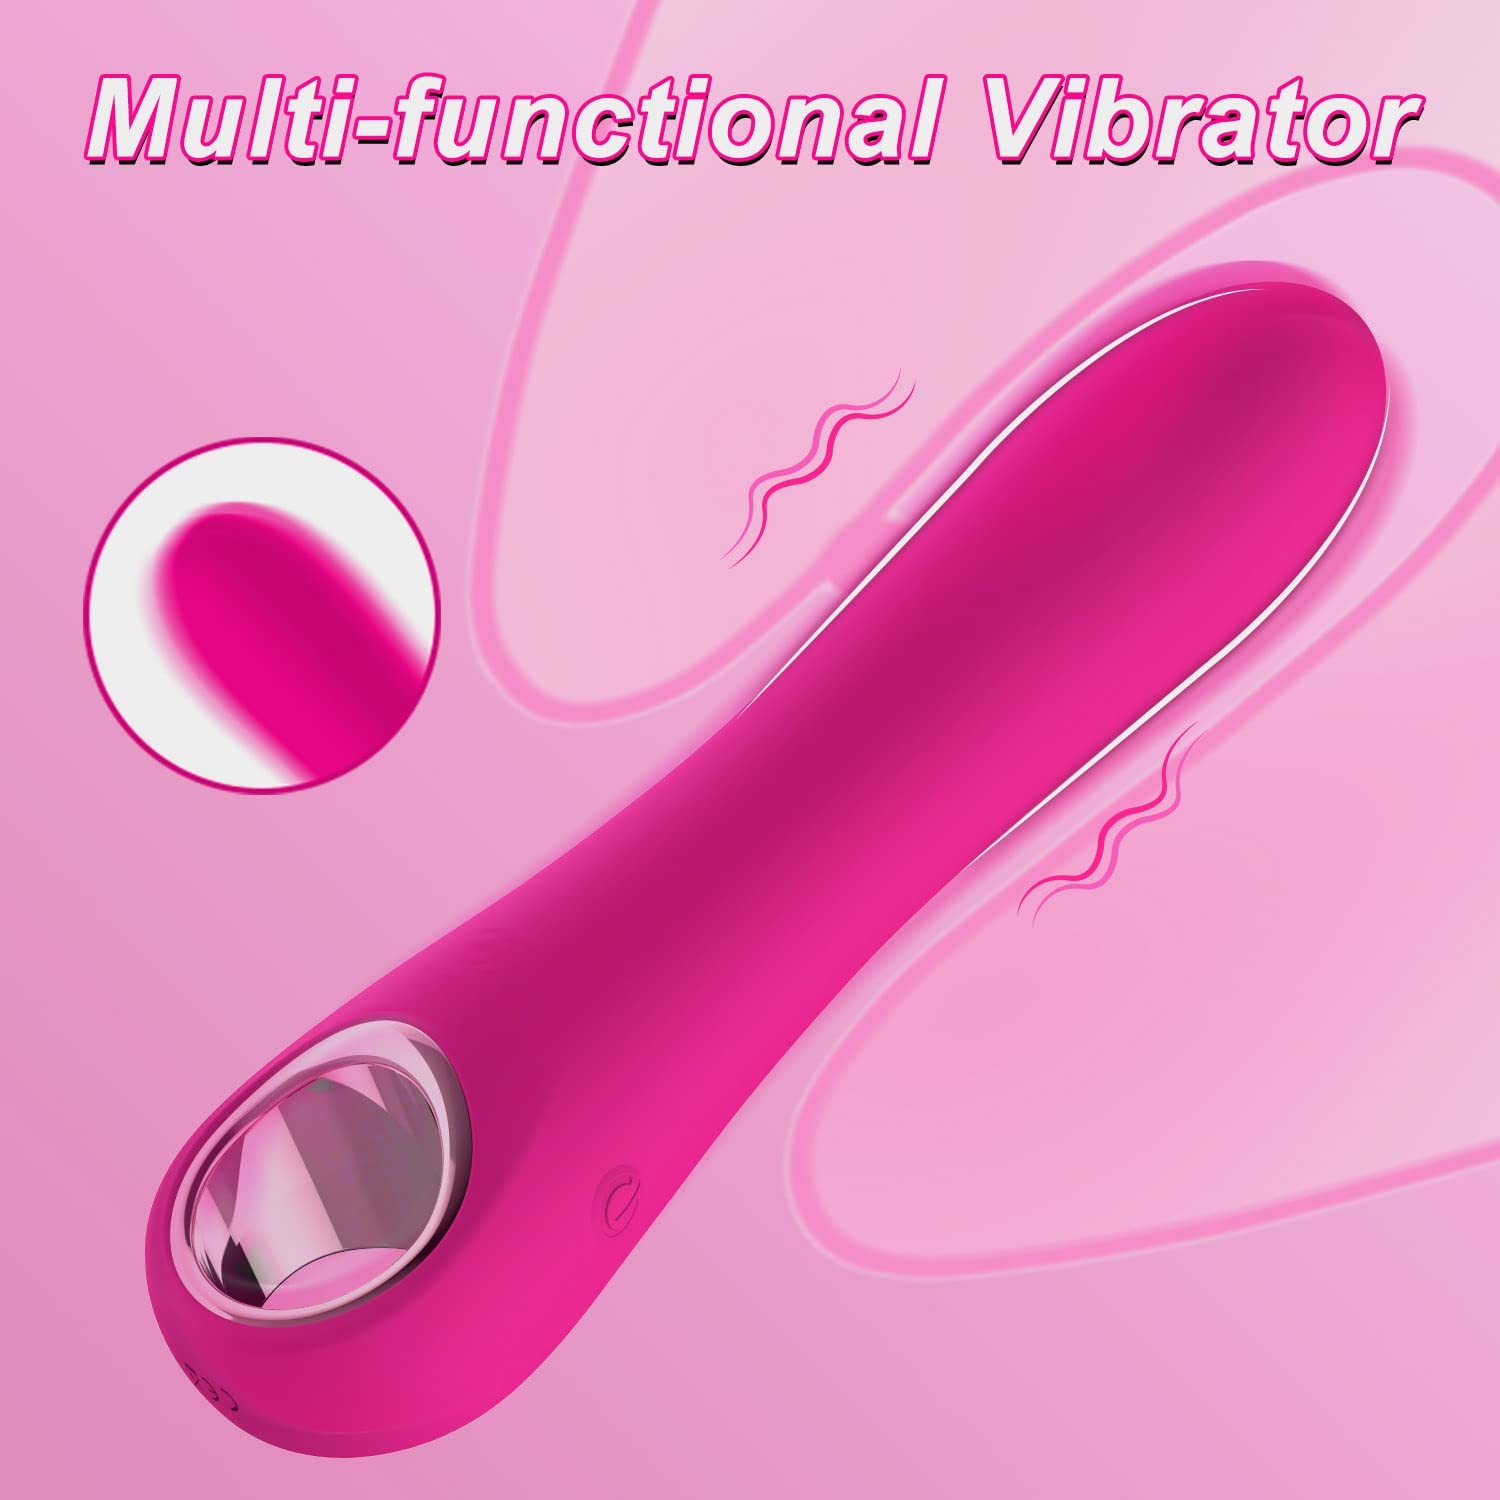 G-Spot Vibrator with 10 Strong Vibrations, Tuitionua Vibrating Dildo Clitoris Nipple Vagina Massager Stimulator, Adult Sex Toys for Solo or Couple(Pink)